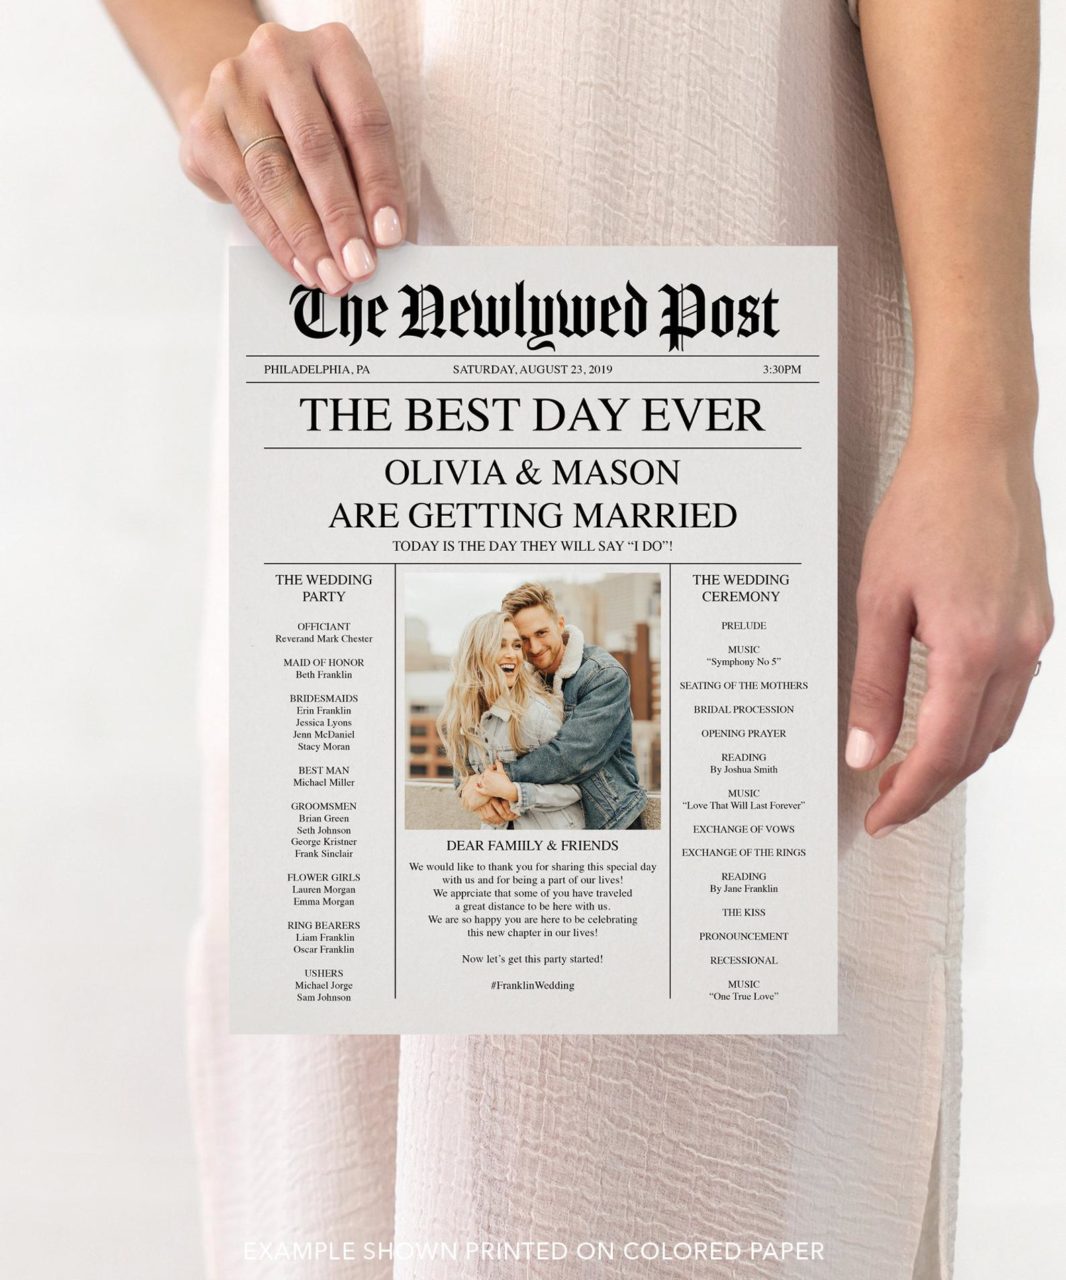 A woman holding a wedding program designed to look like a newspaper